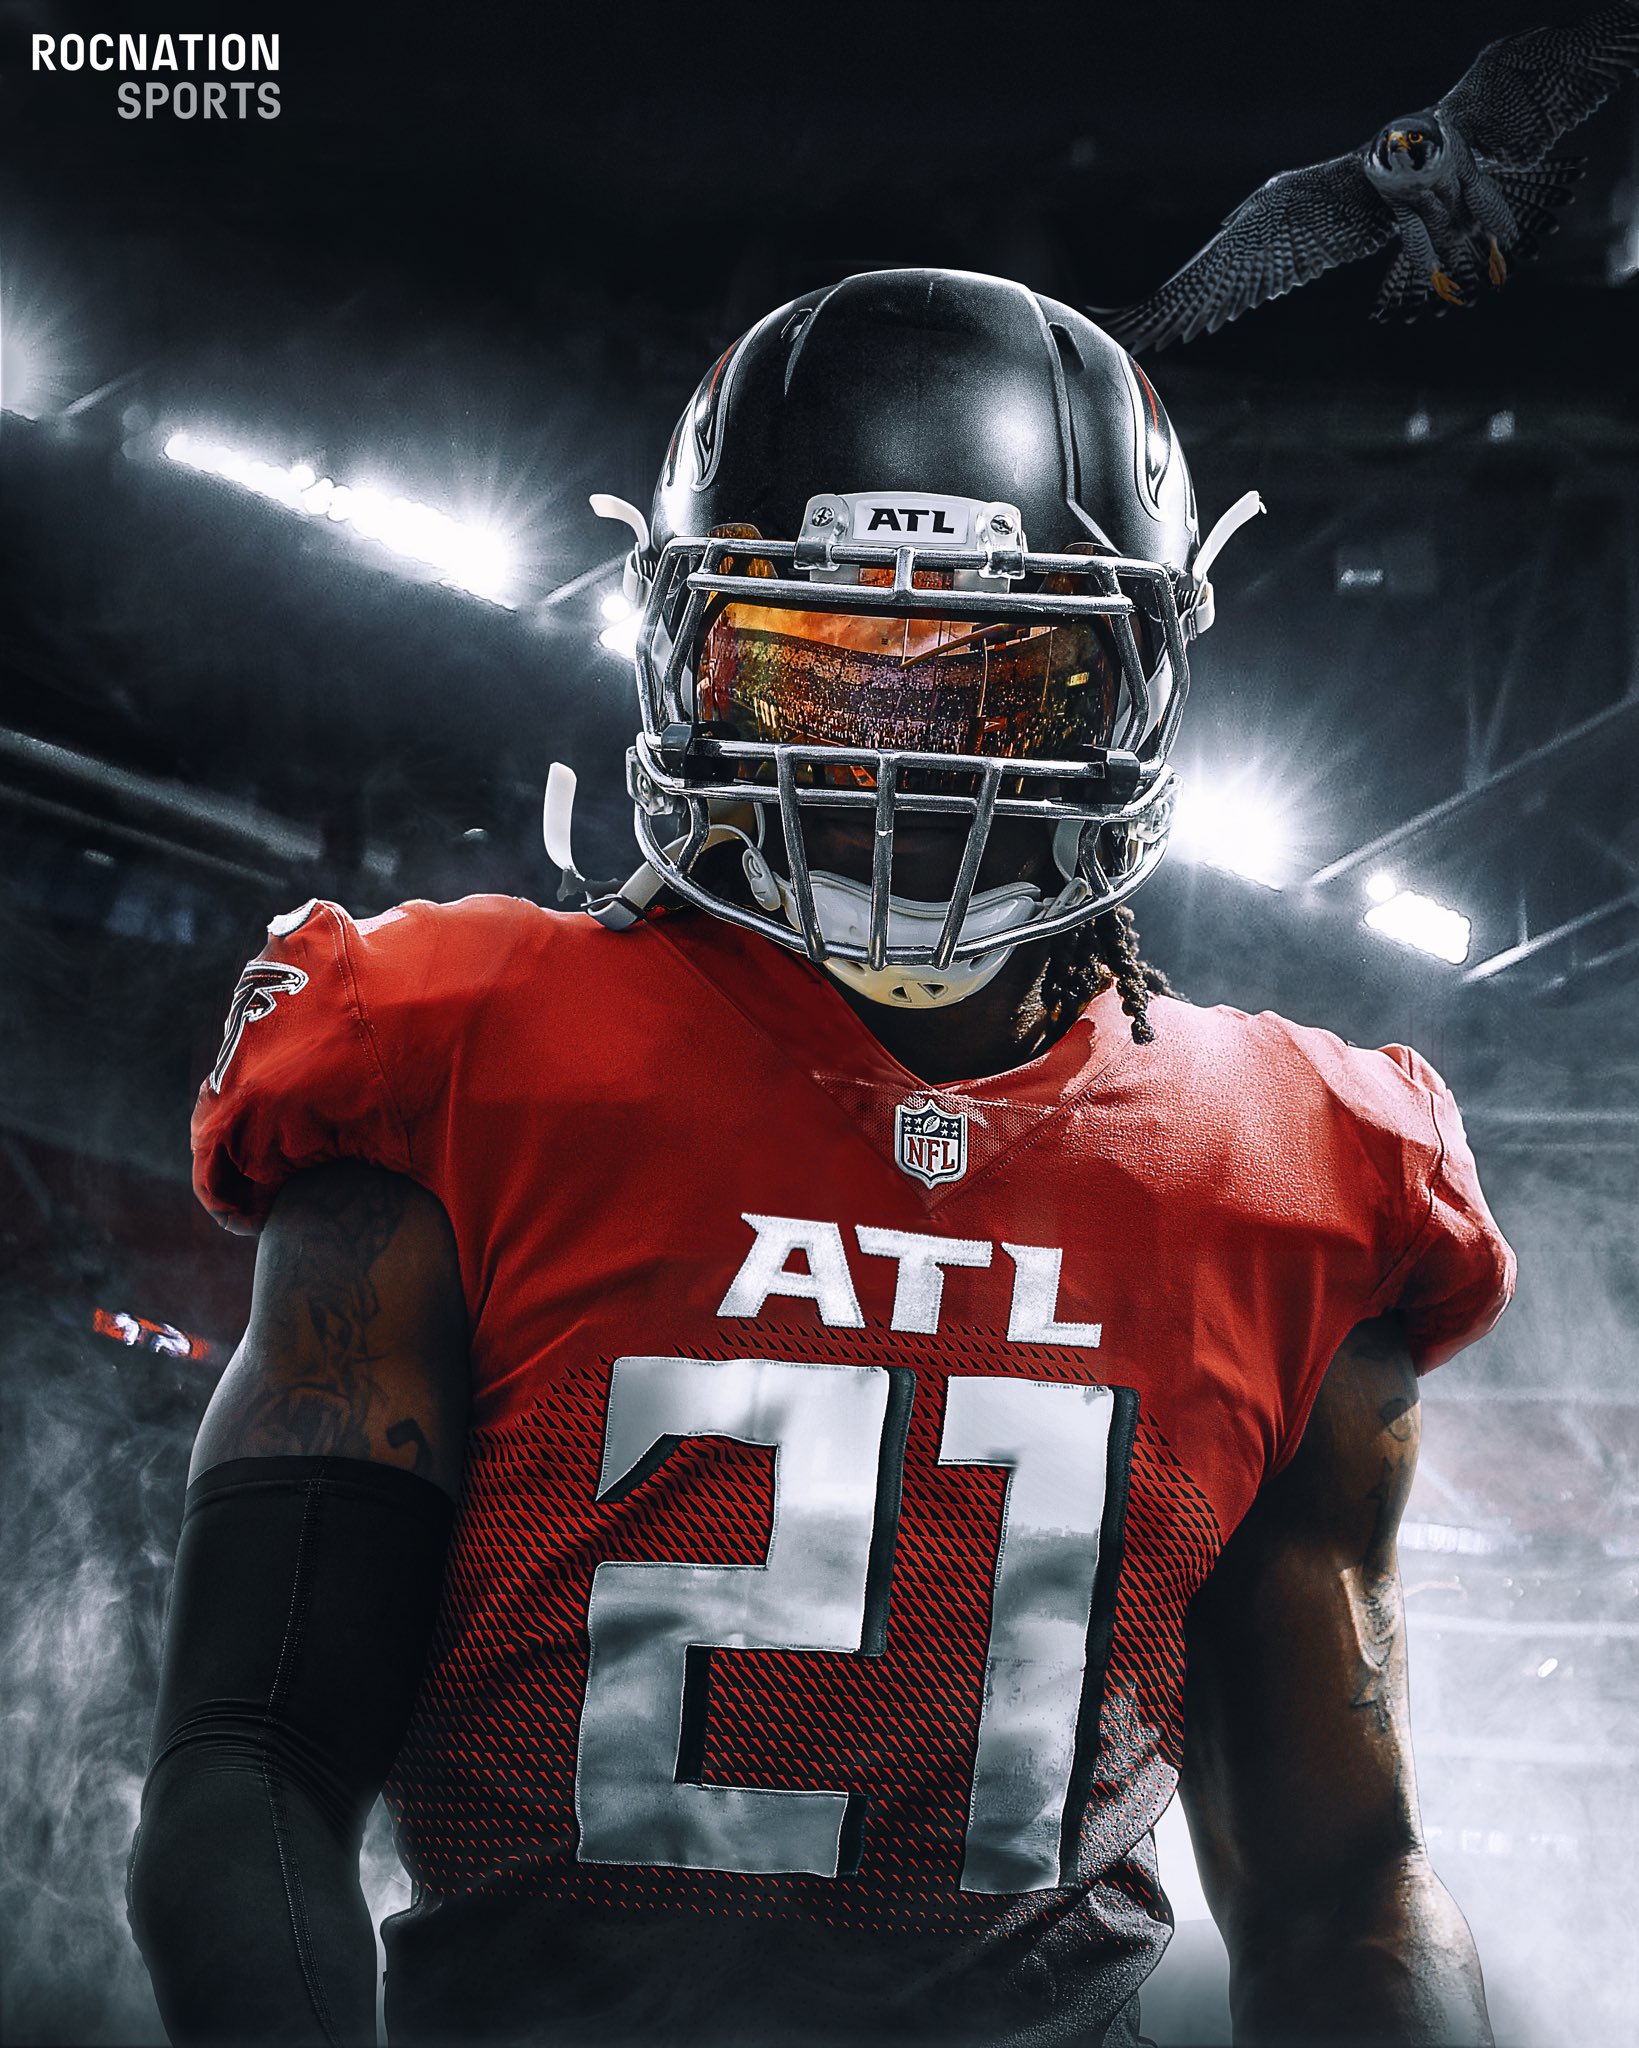 Todd Gurley reveals new jersey number with Atlanta Falcons